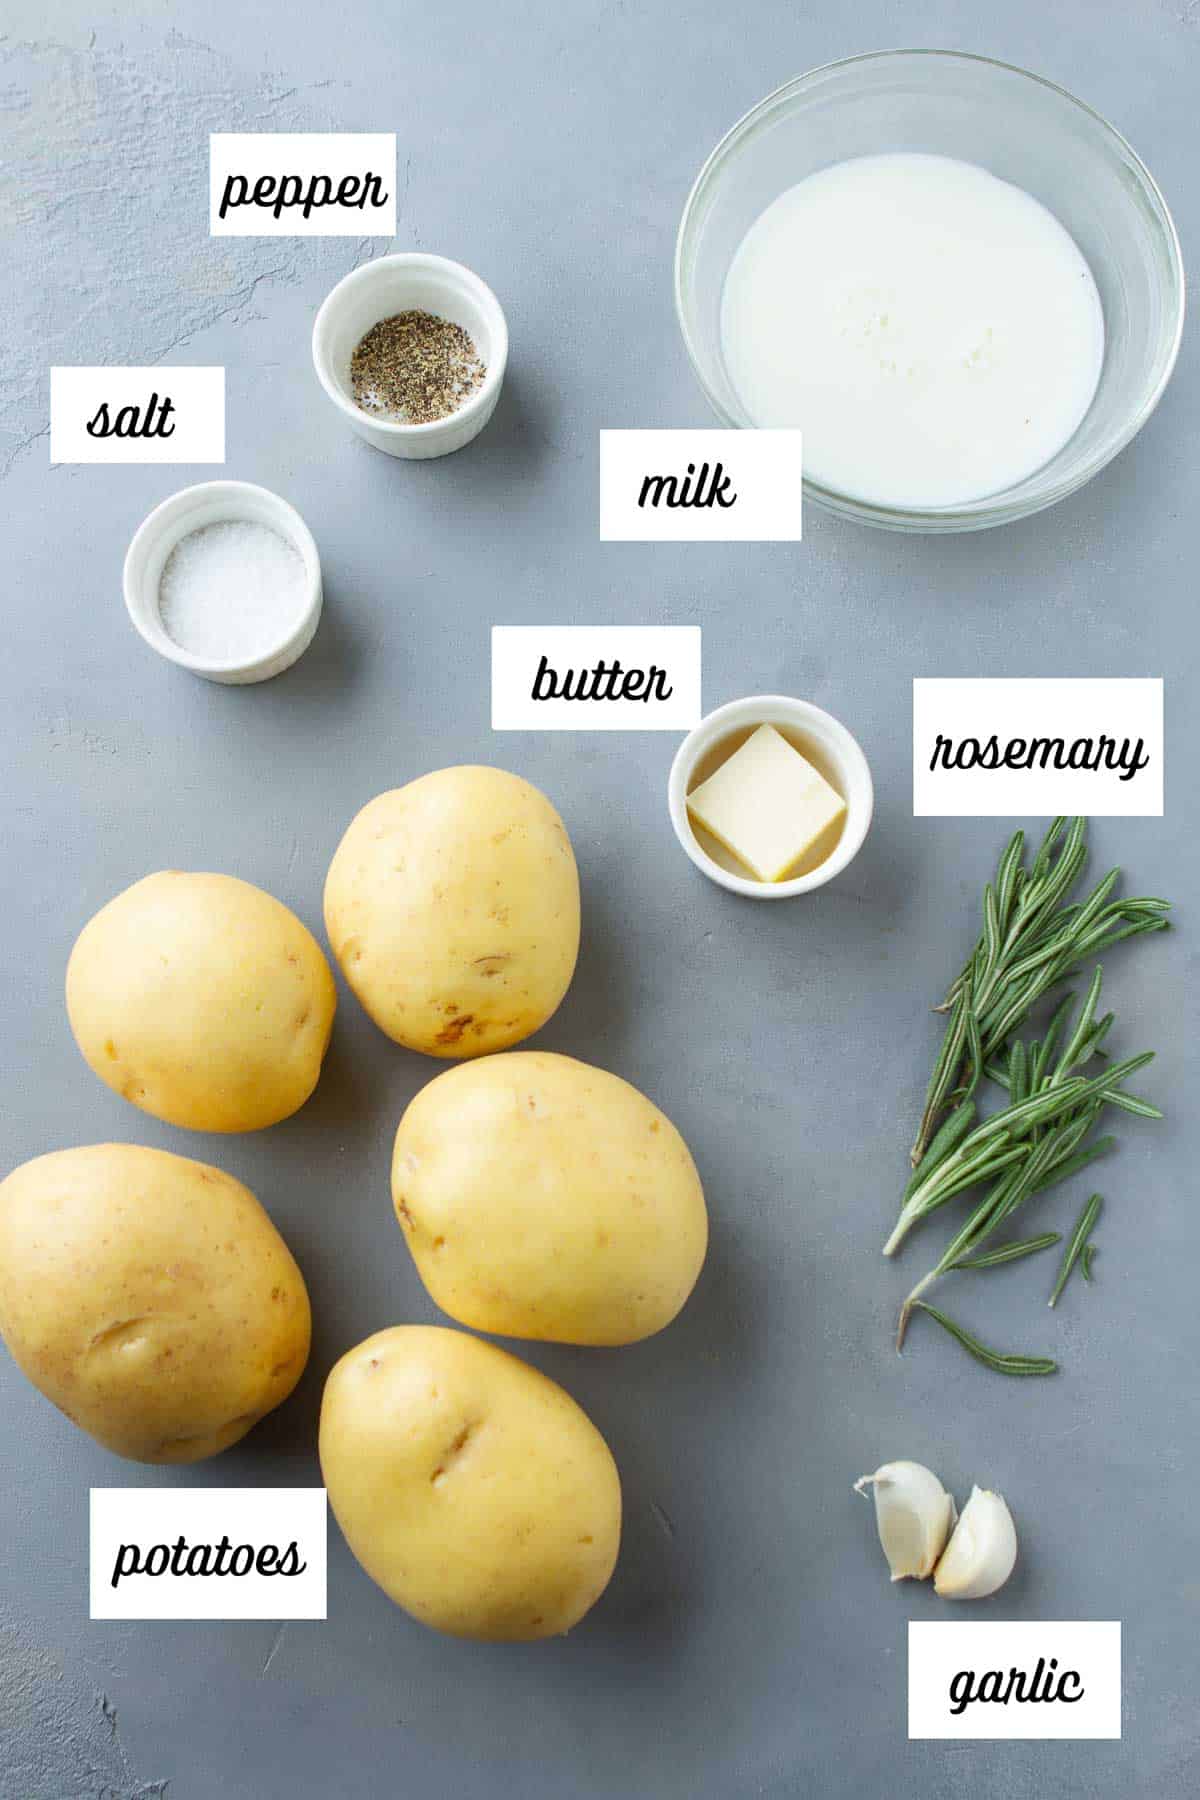 Labeled ingredients for rosemary garlic mashed potatoes.